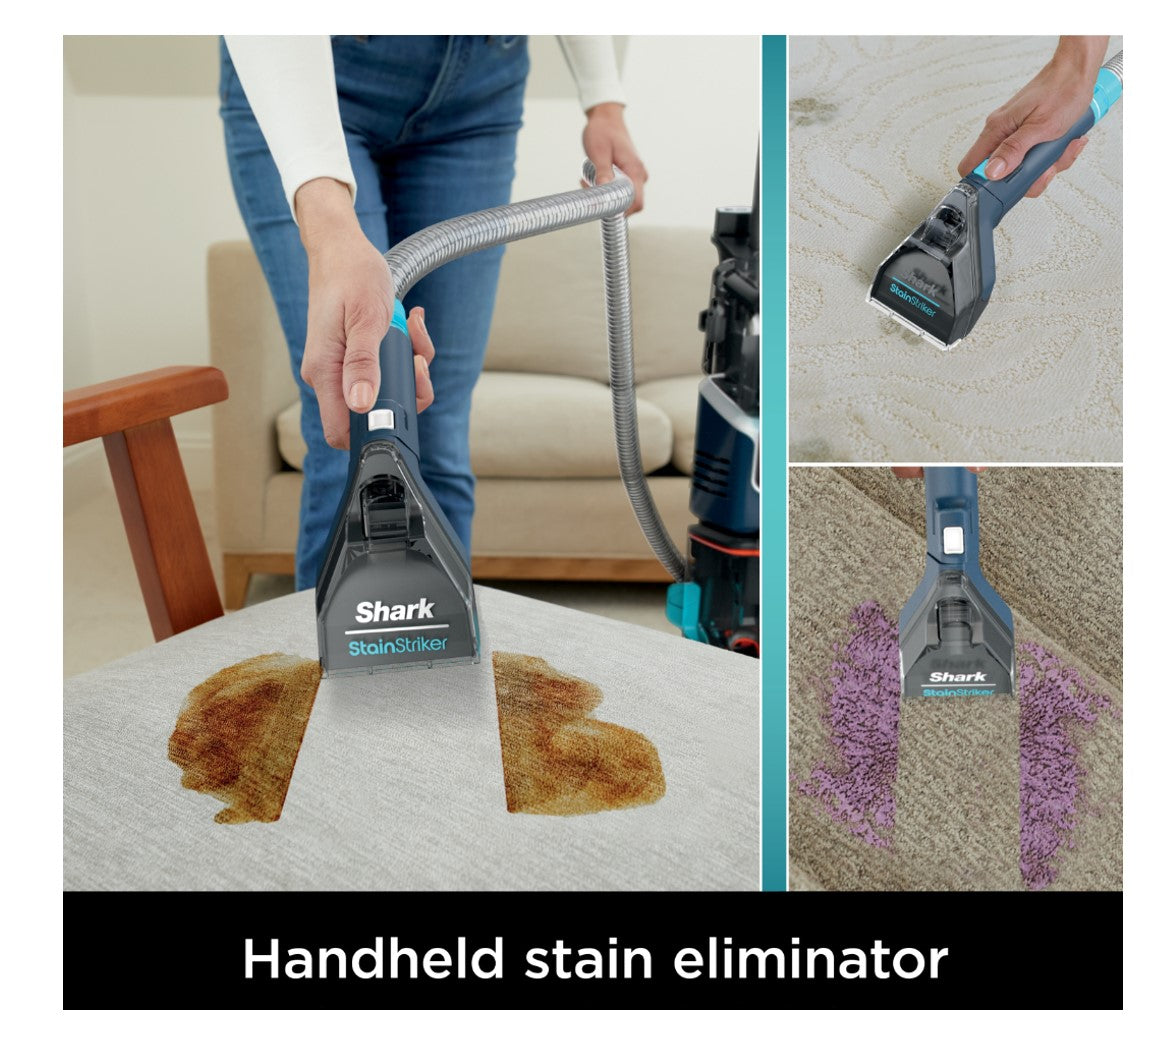 Shark R-EX205 CarpetXpert Carpet, Area Rug & Upholstery Cleaner with StainStriker, Built-in Spot & Stain Cleaner, Teal - Certified Refurbished